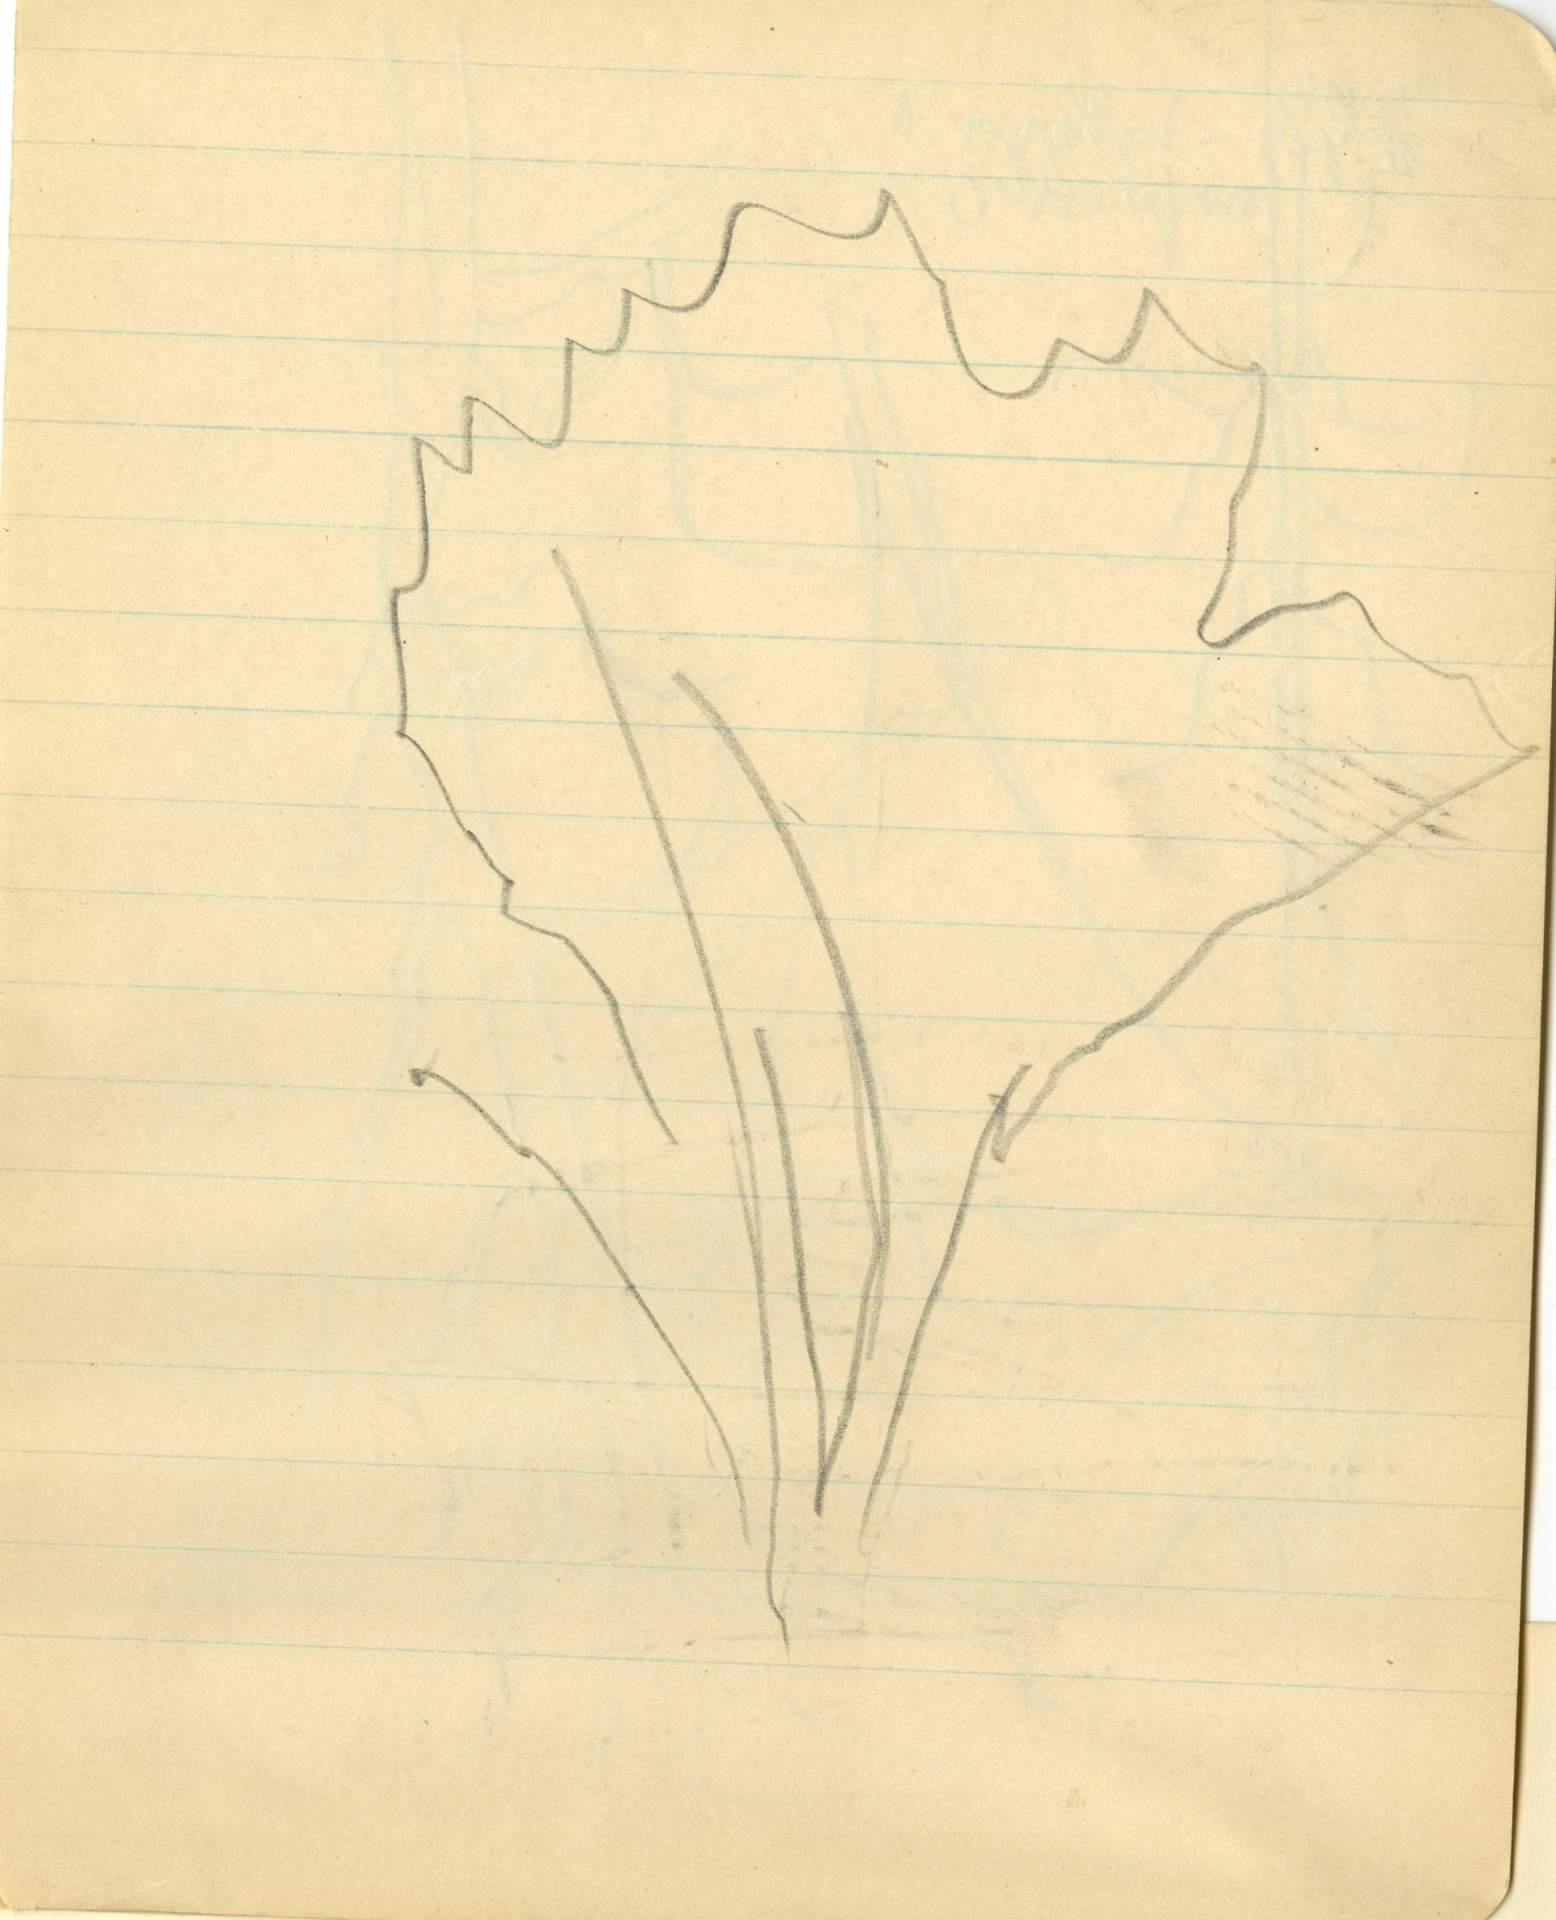 Sketch of tree outline